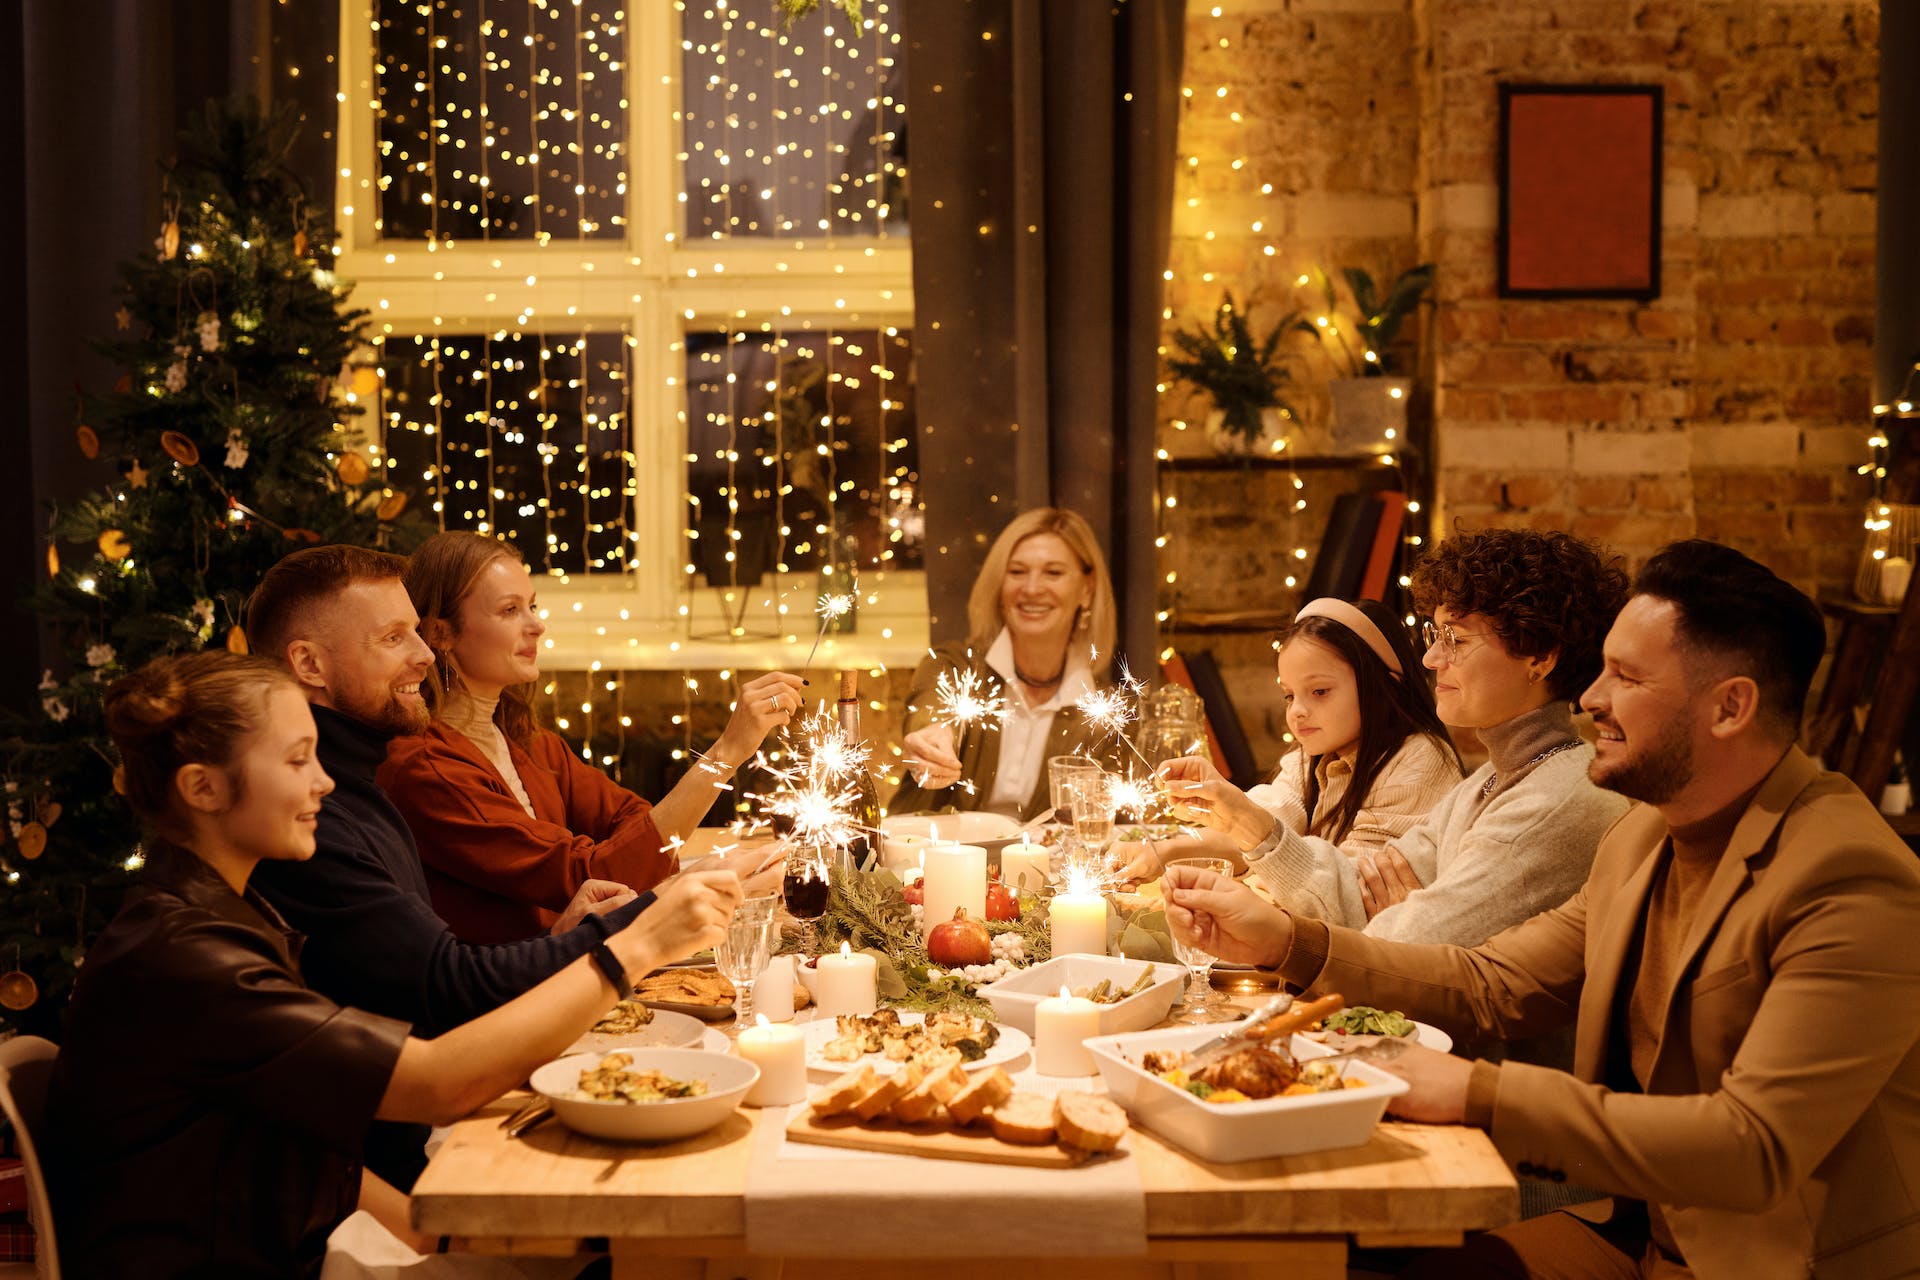 Family members gathered for Christmas dinner | Source: Pexels